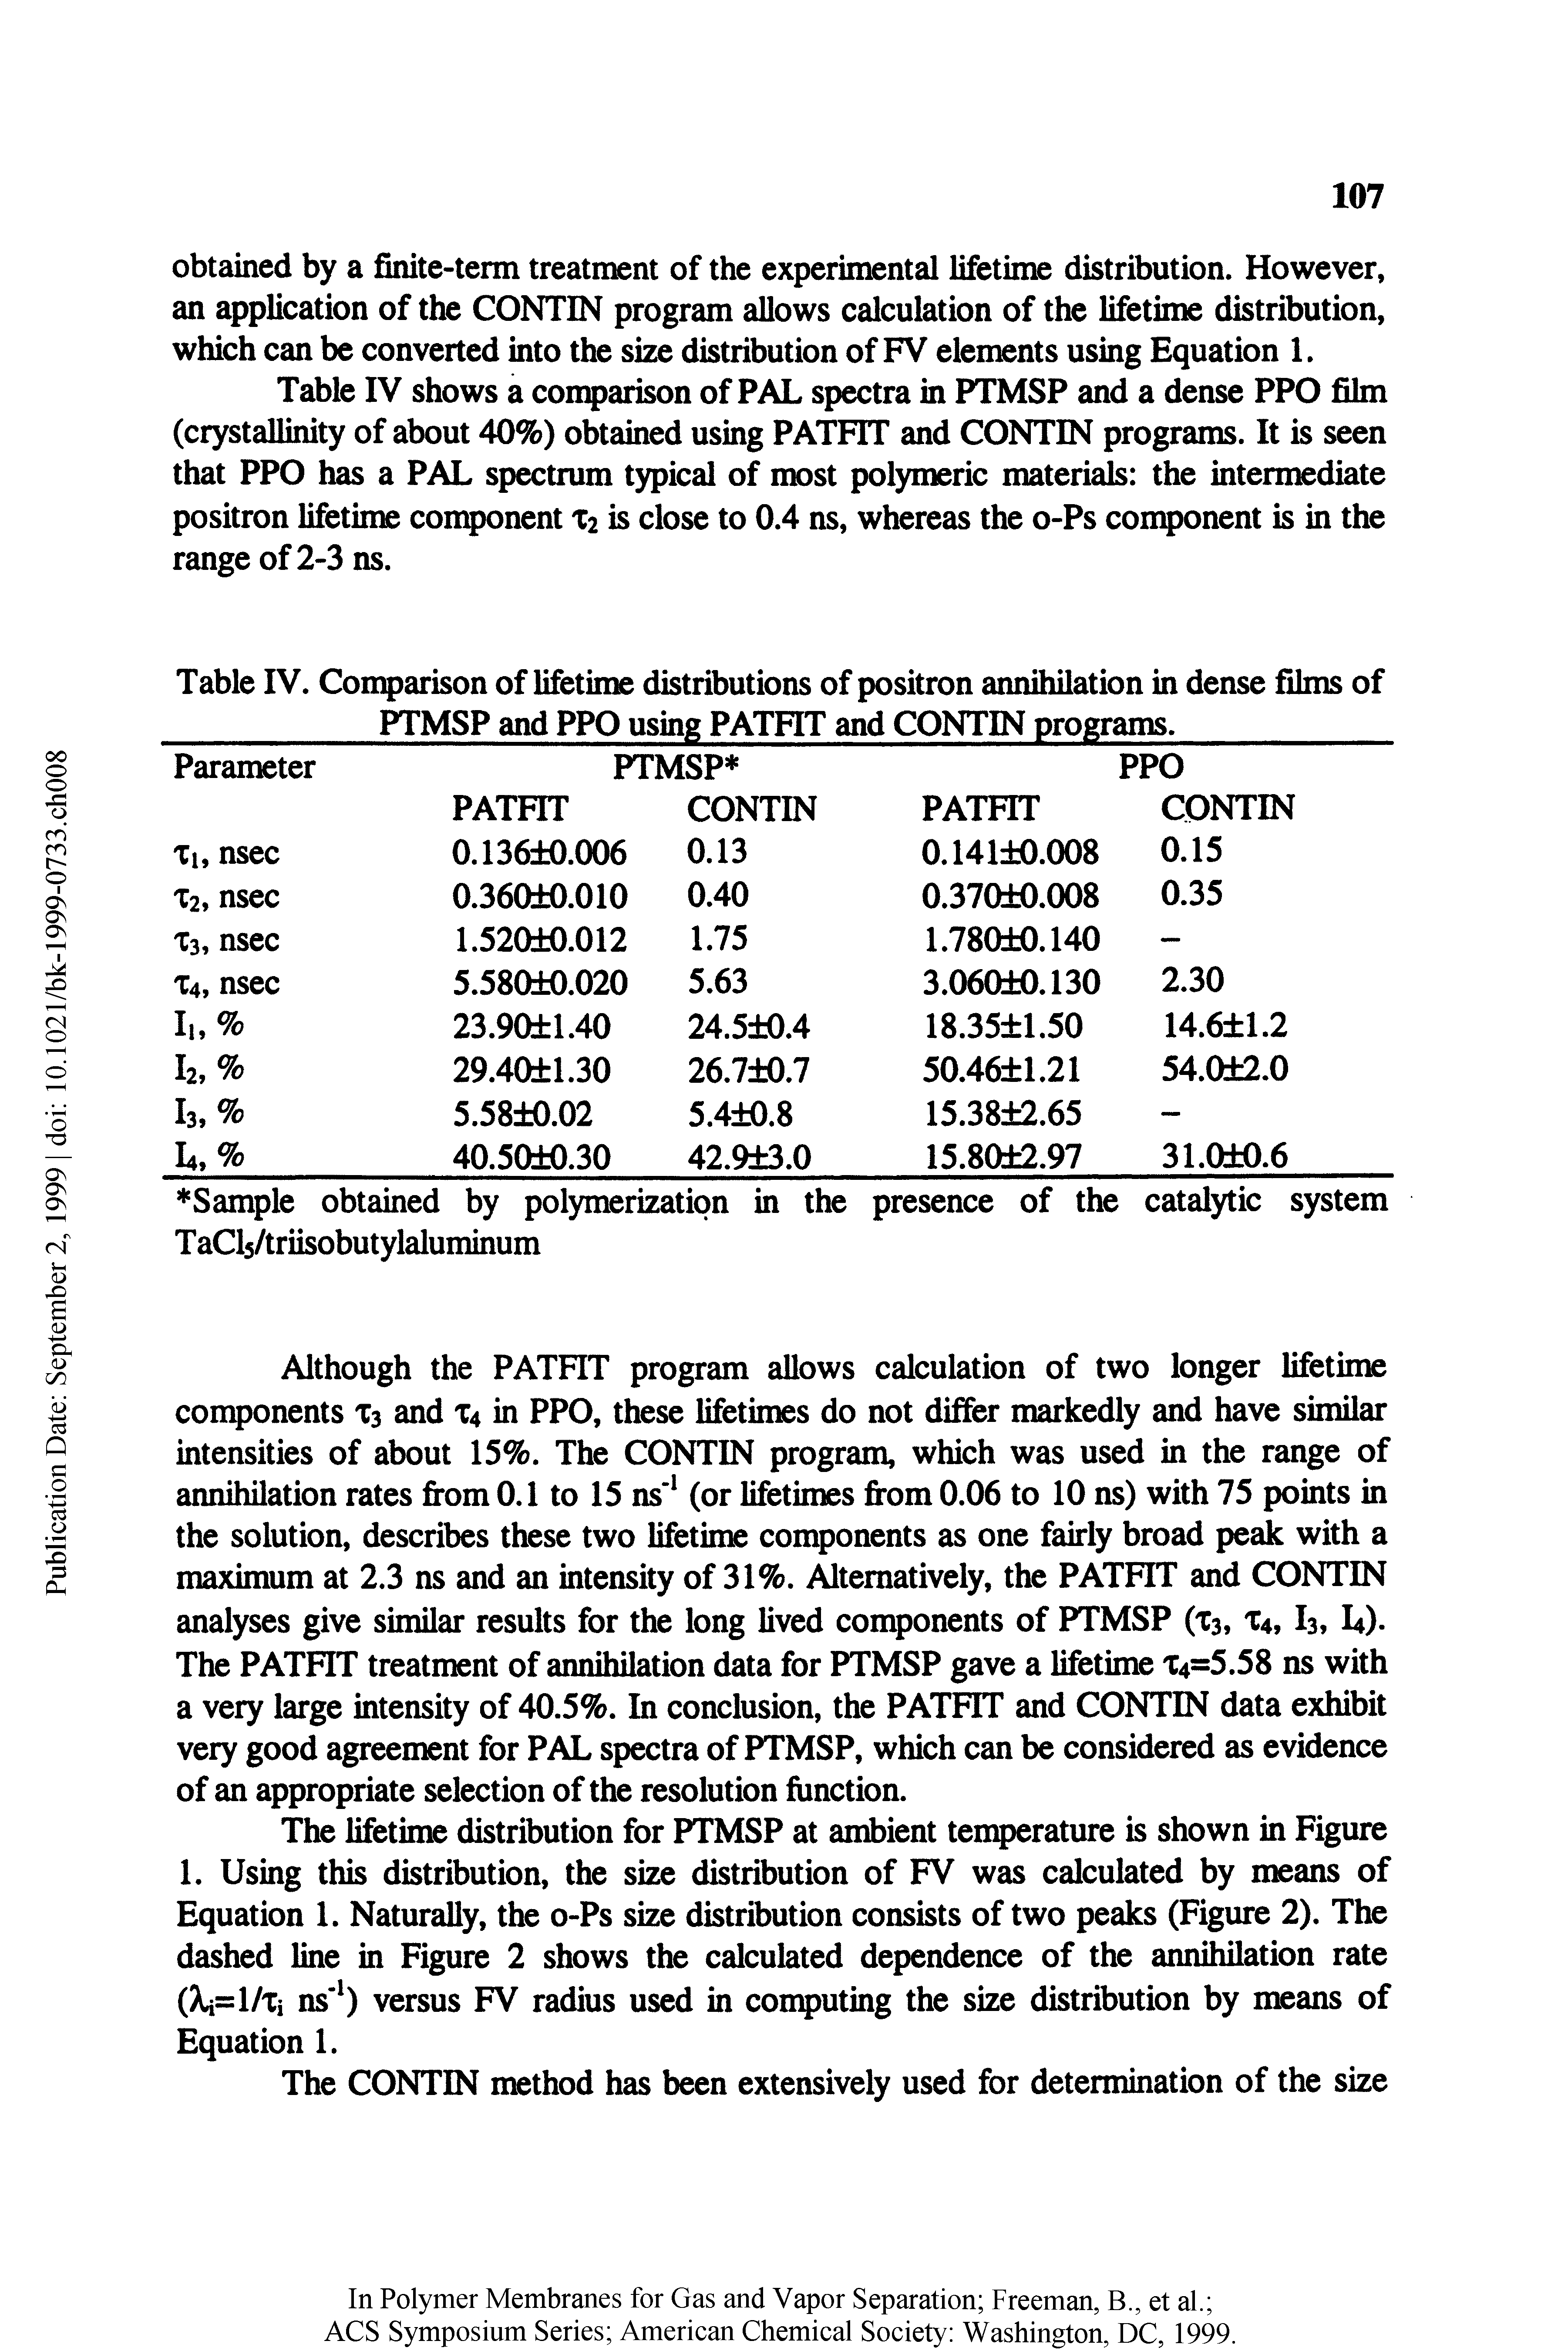 Table IV shows a conqtarison of PAL spectra in PTMSP and a dense PPO film (crystallinity of about 40%) obtained using PATFIT and CONTIN programs. It is seen that PPO has a PAL spectrum typical of most polymeric materials the intermediate positron lifetime conqranent %2 is close to 0.4 ns, whereas the o-Ps conqmnent is in the range of 2-3 ns.